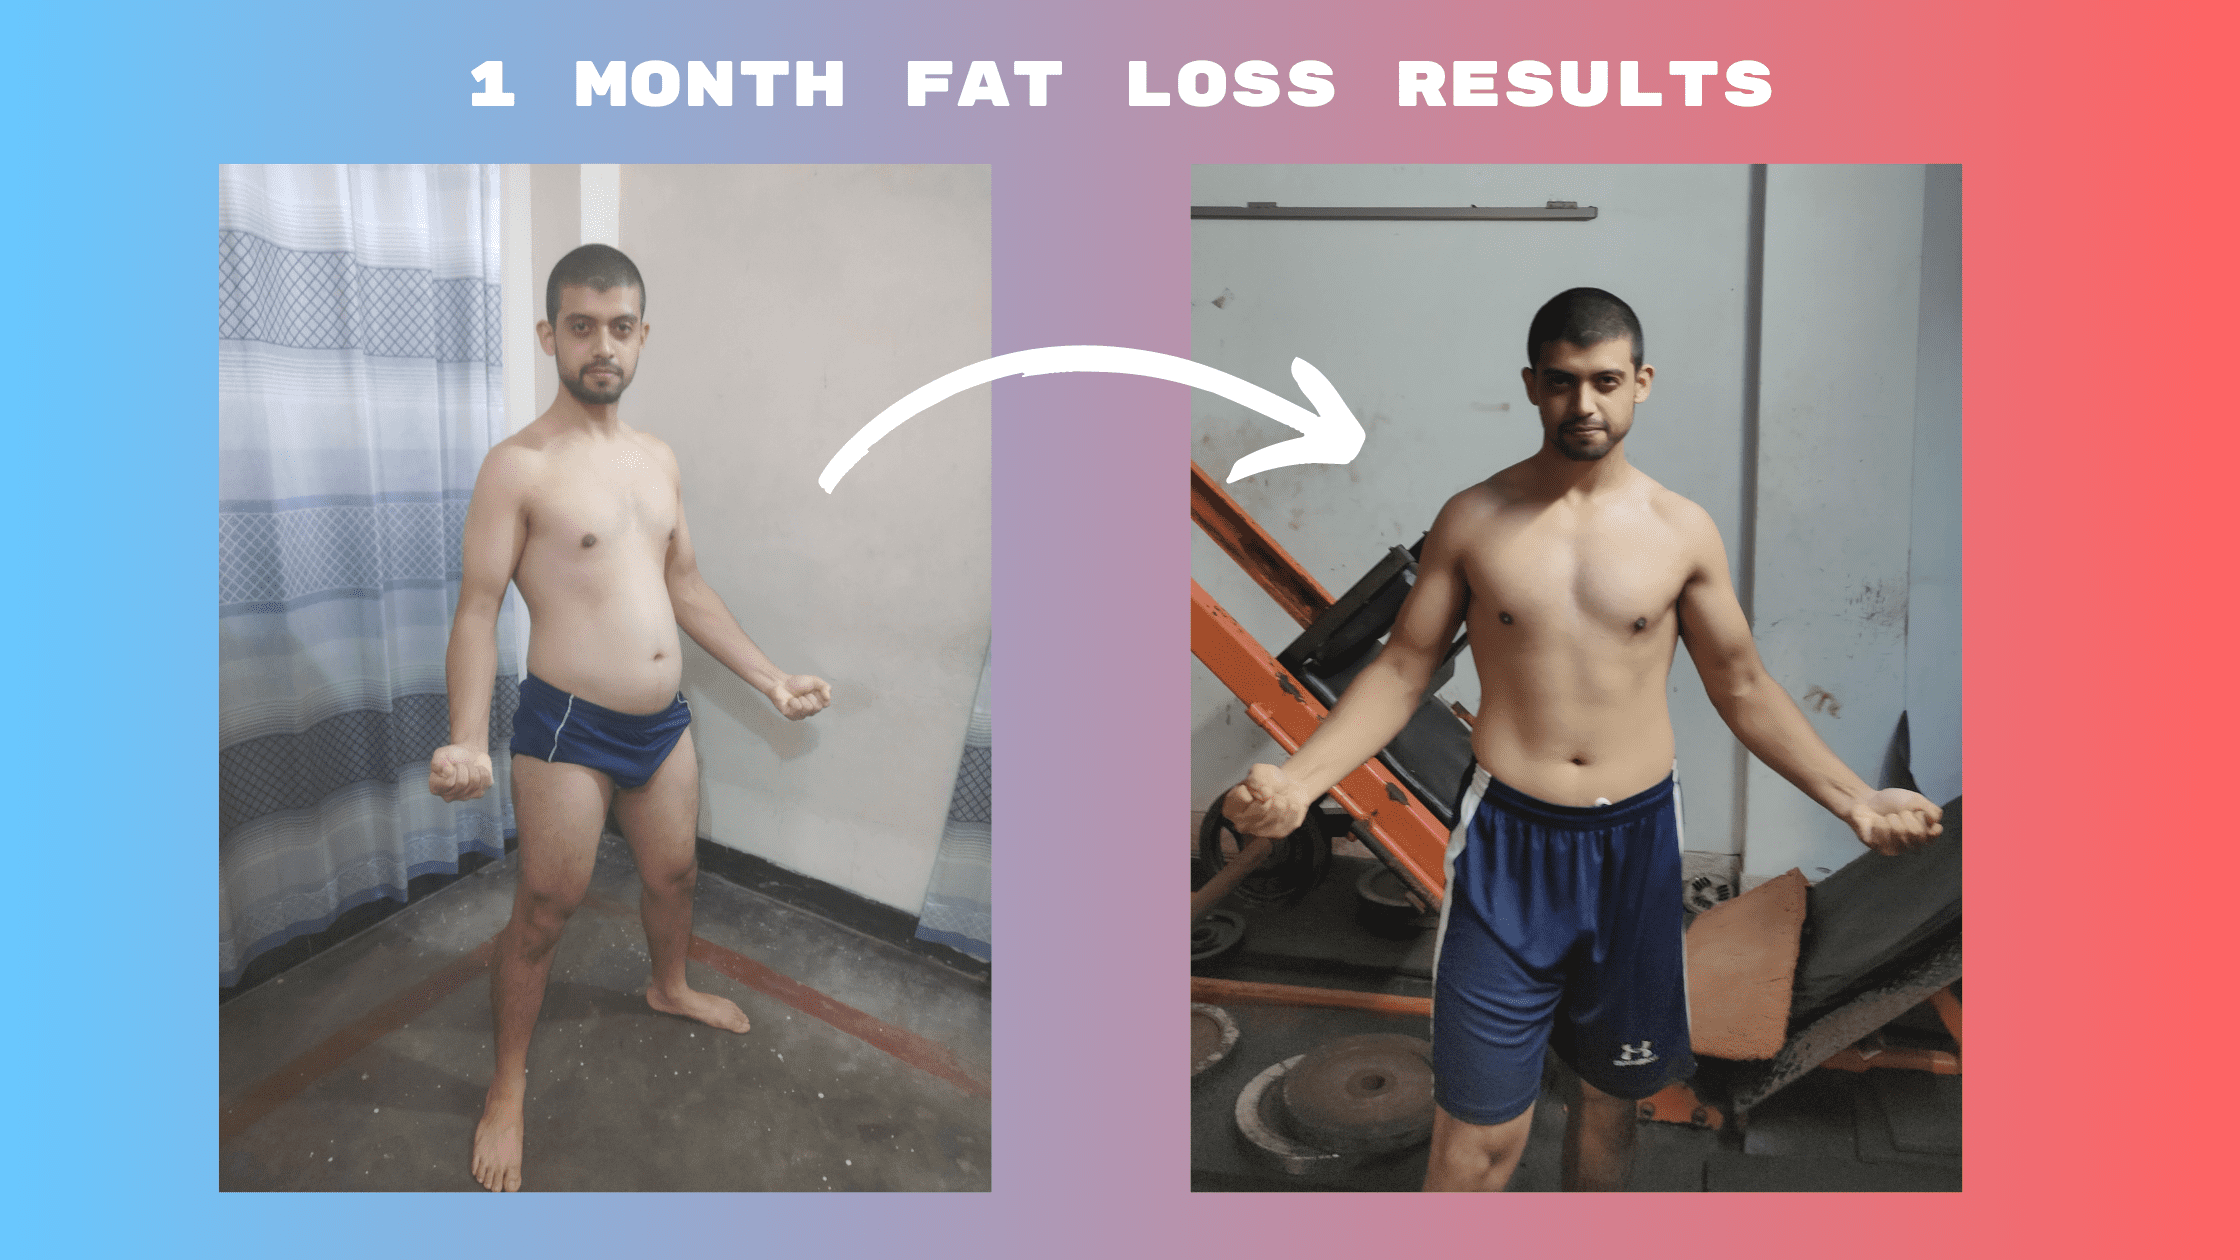 What I learnt from my fat loss challenge